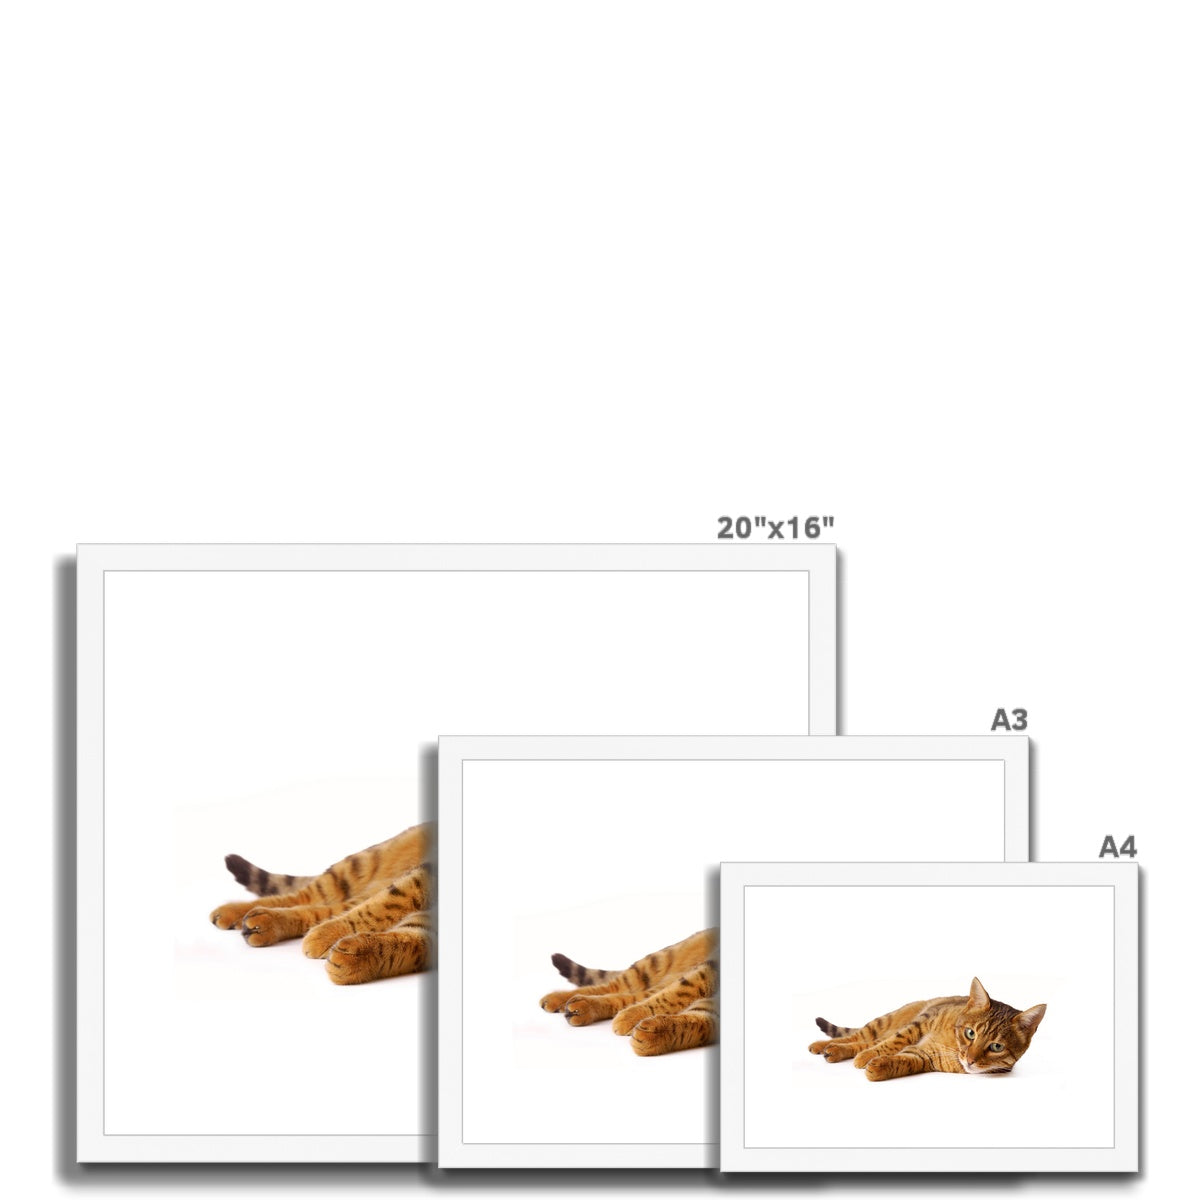 Bengal cat lying on its side on a white background Framed & Mounted Print